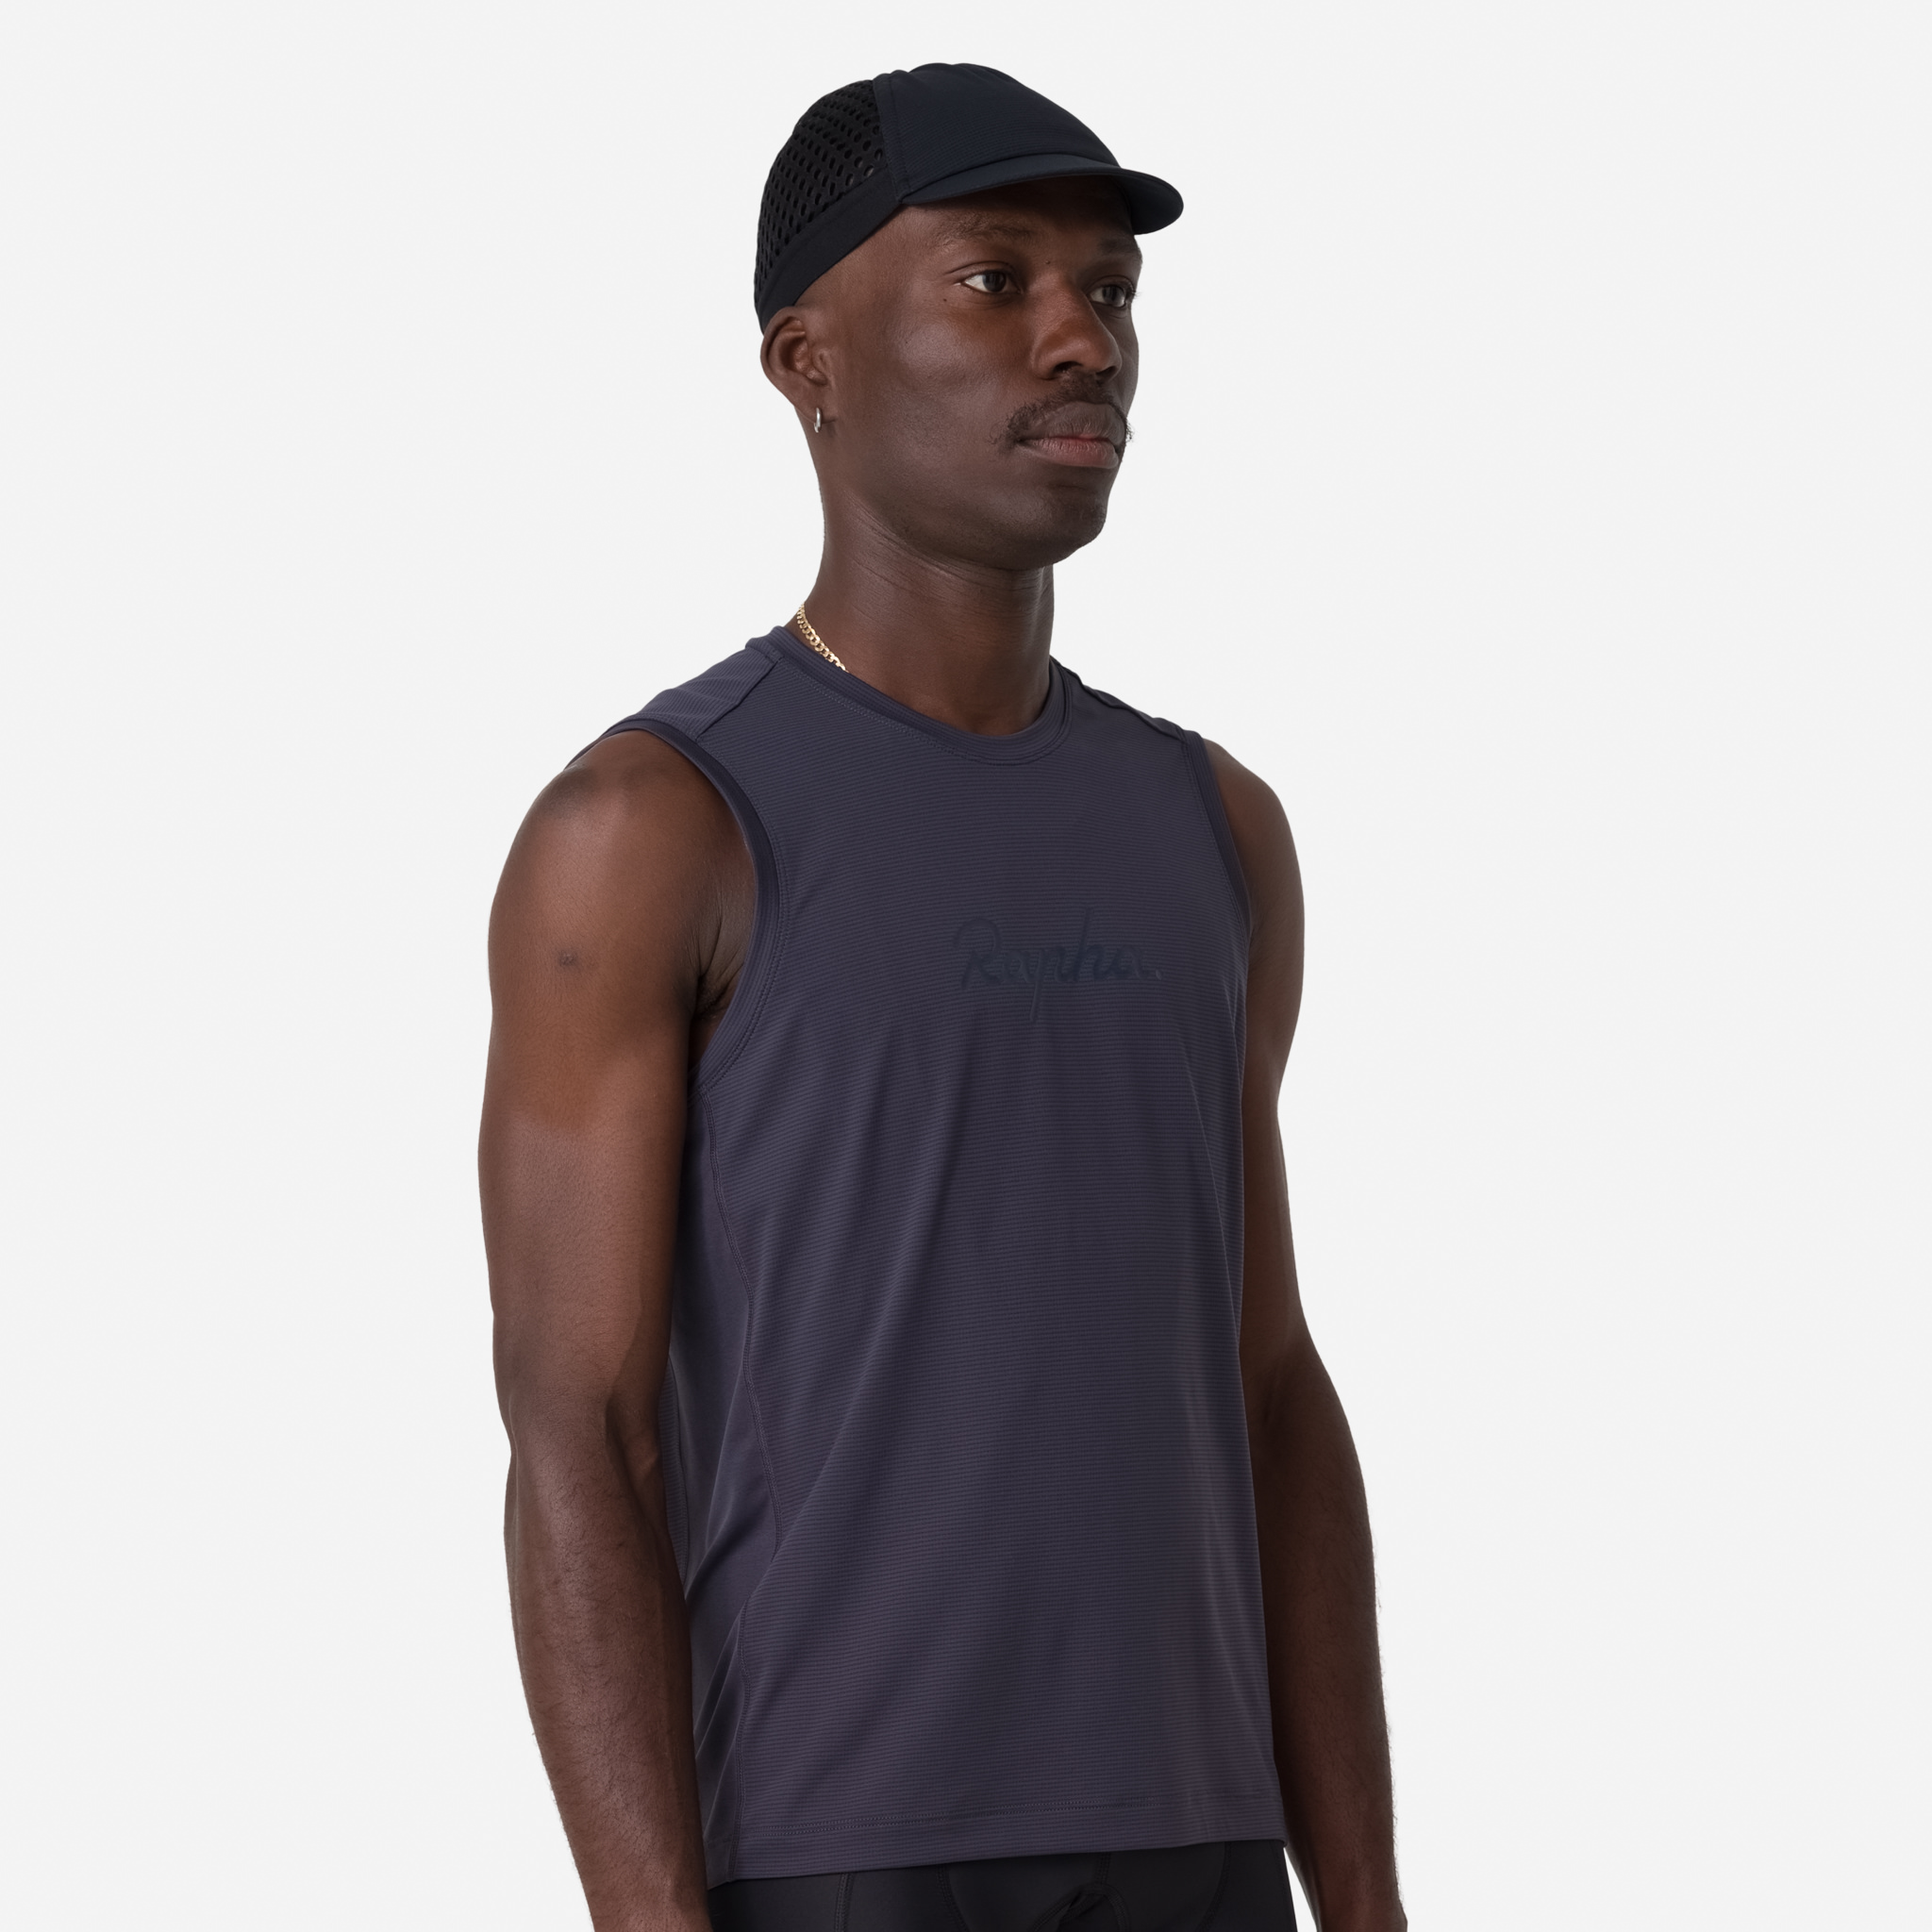 Men's Indoor Training T-Shirt, Mens Breathable Technical Fabric T-Shirt  Made For Intense Training Sessions Indoors